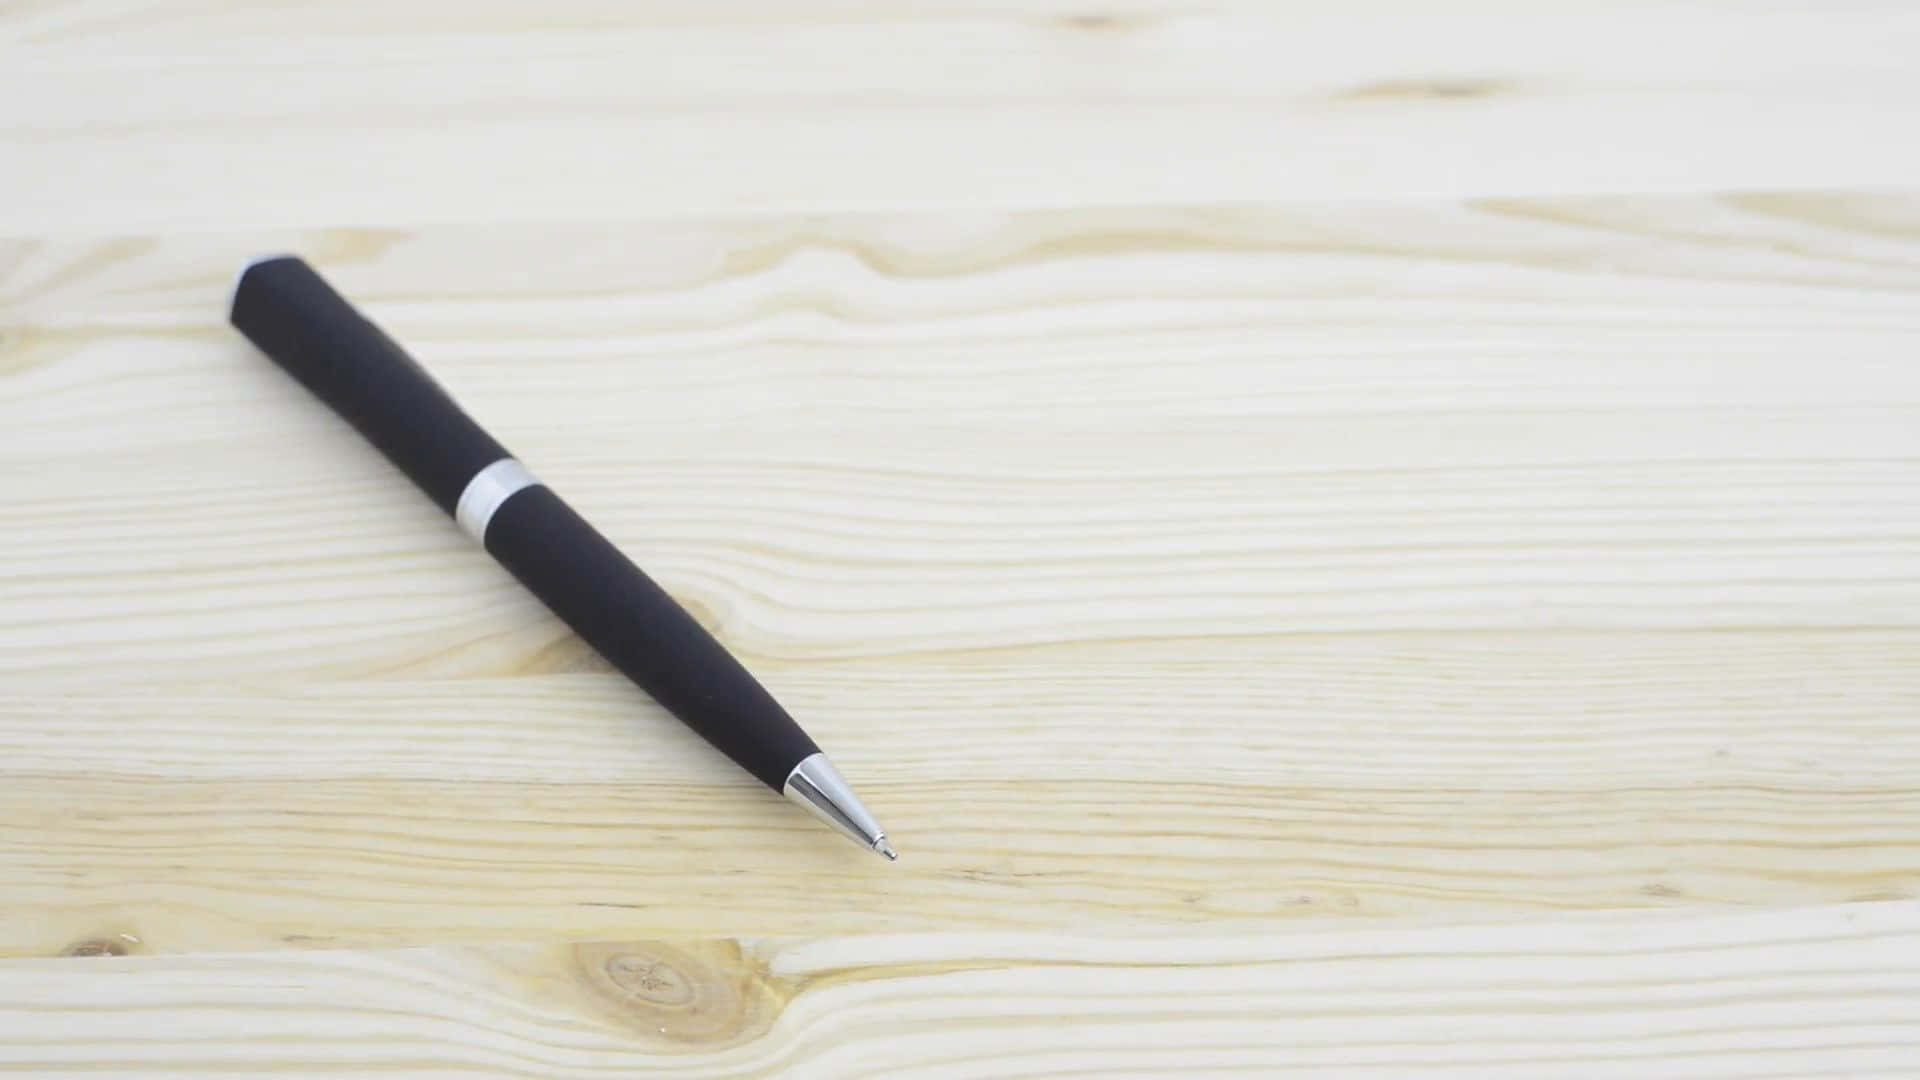 A Black Pen On A Wooden Surface